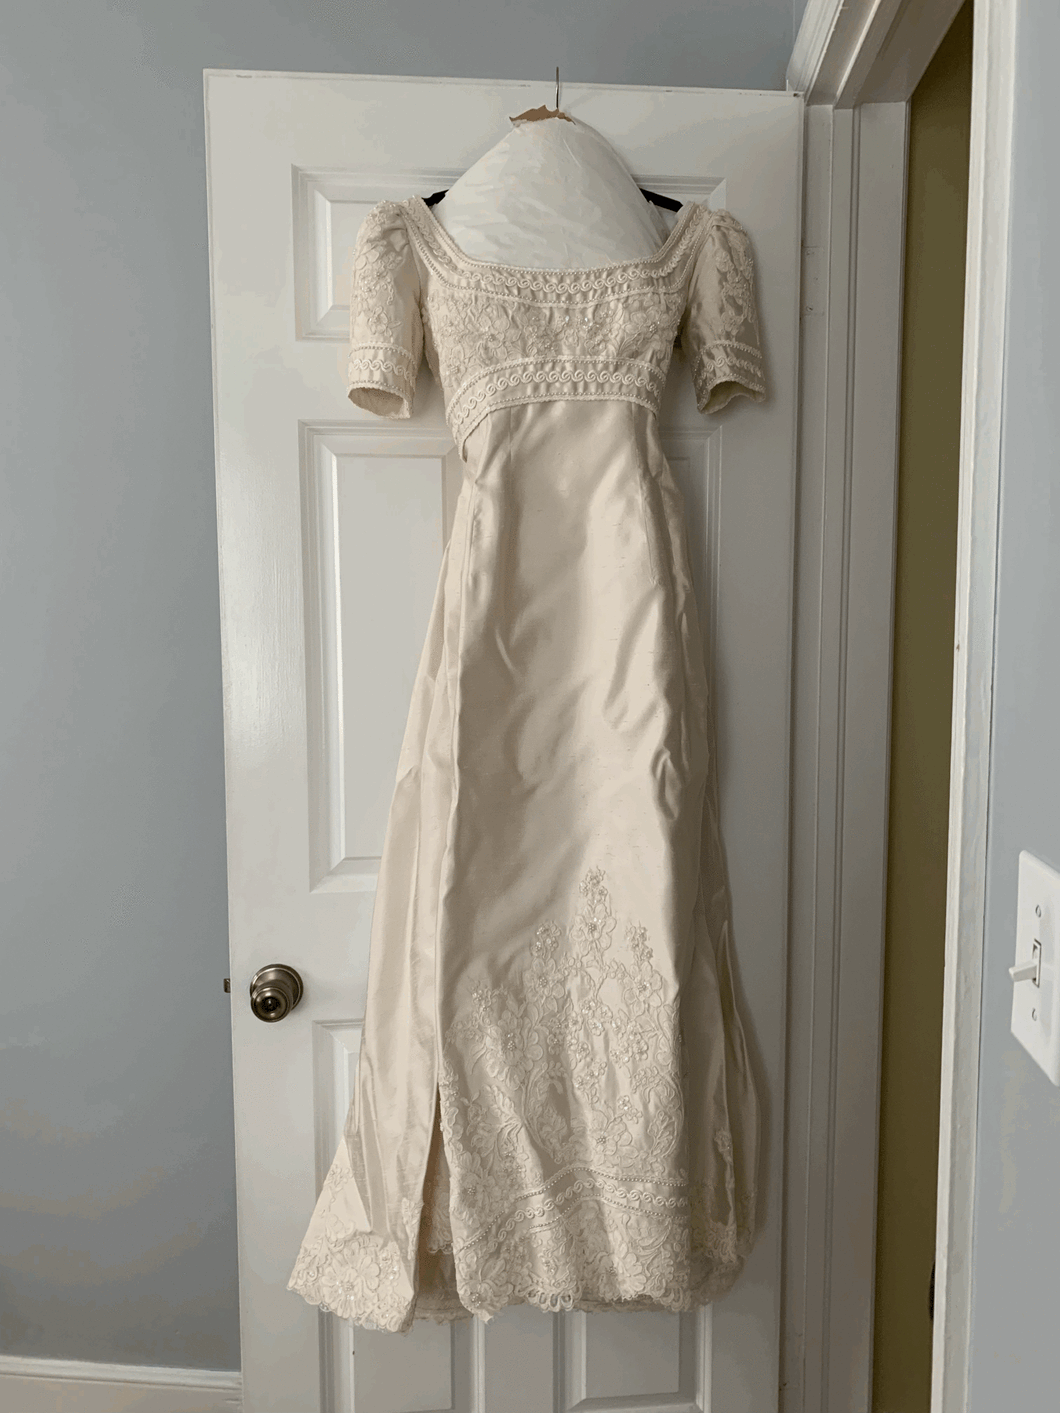 Christos 'unknown' wedding dress size-02 PREOWNED